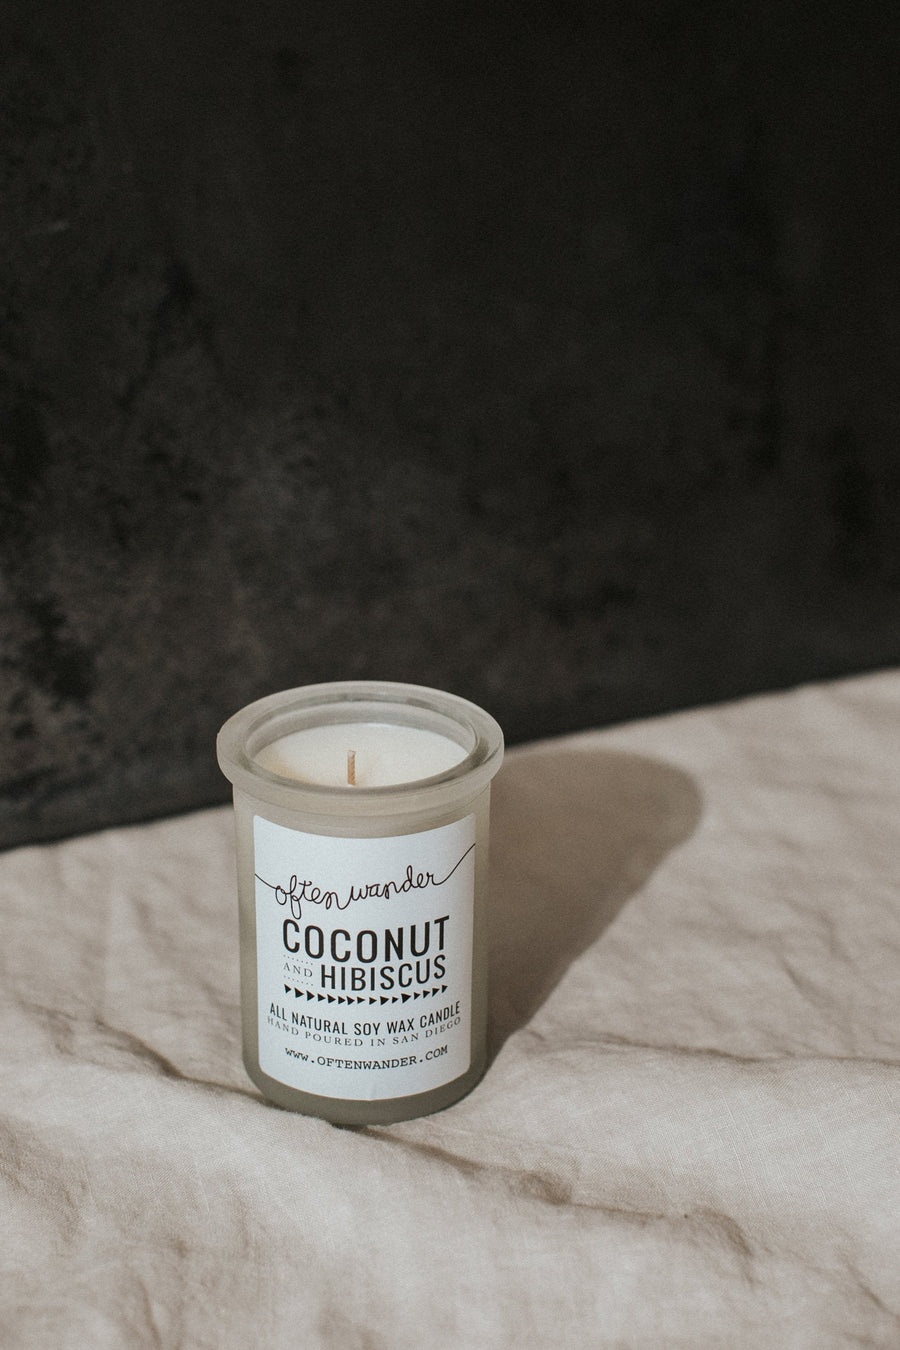 Often Wander Objects 6 oz / Coconut & Hibiscus / FINAL SALE Coconut & Hibiscus Apothecary Candle